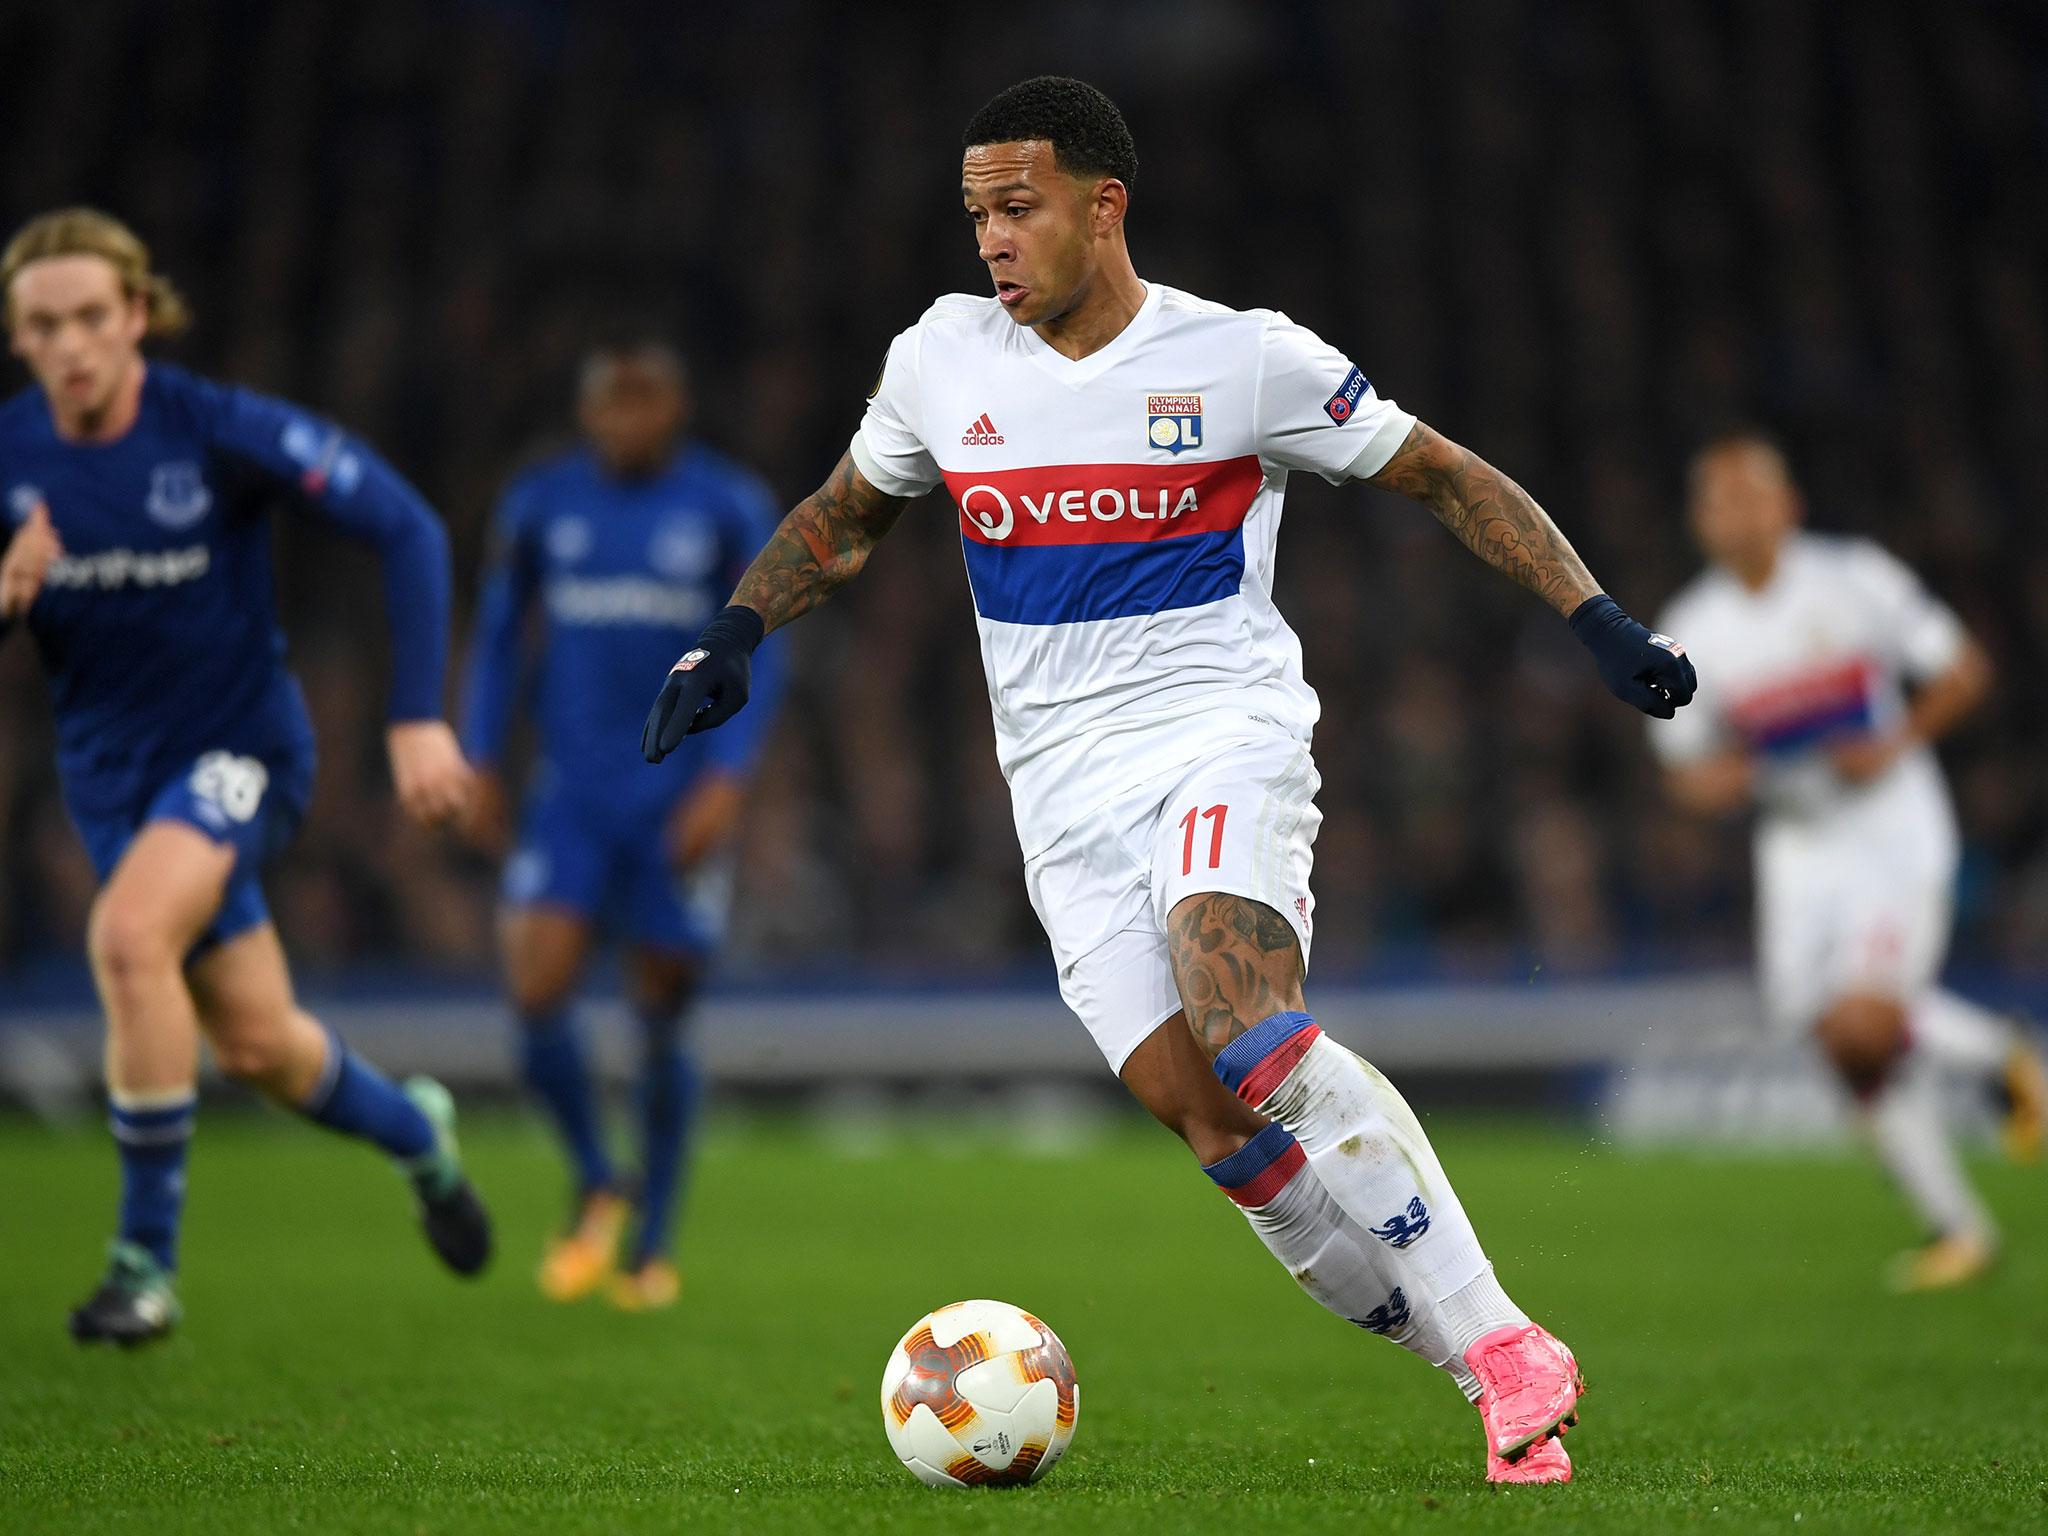 Depay is one to watch this evening